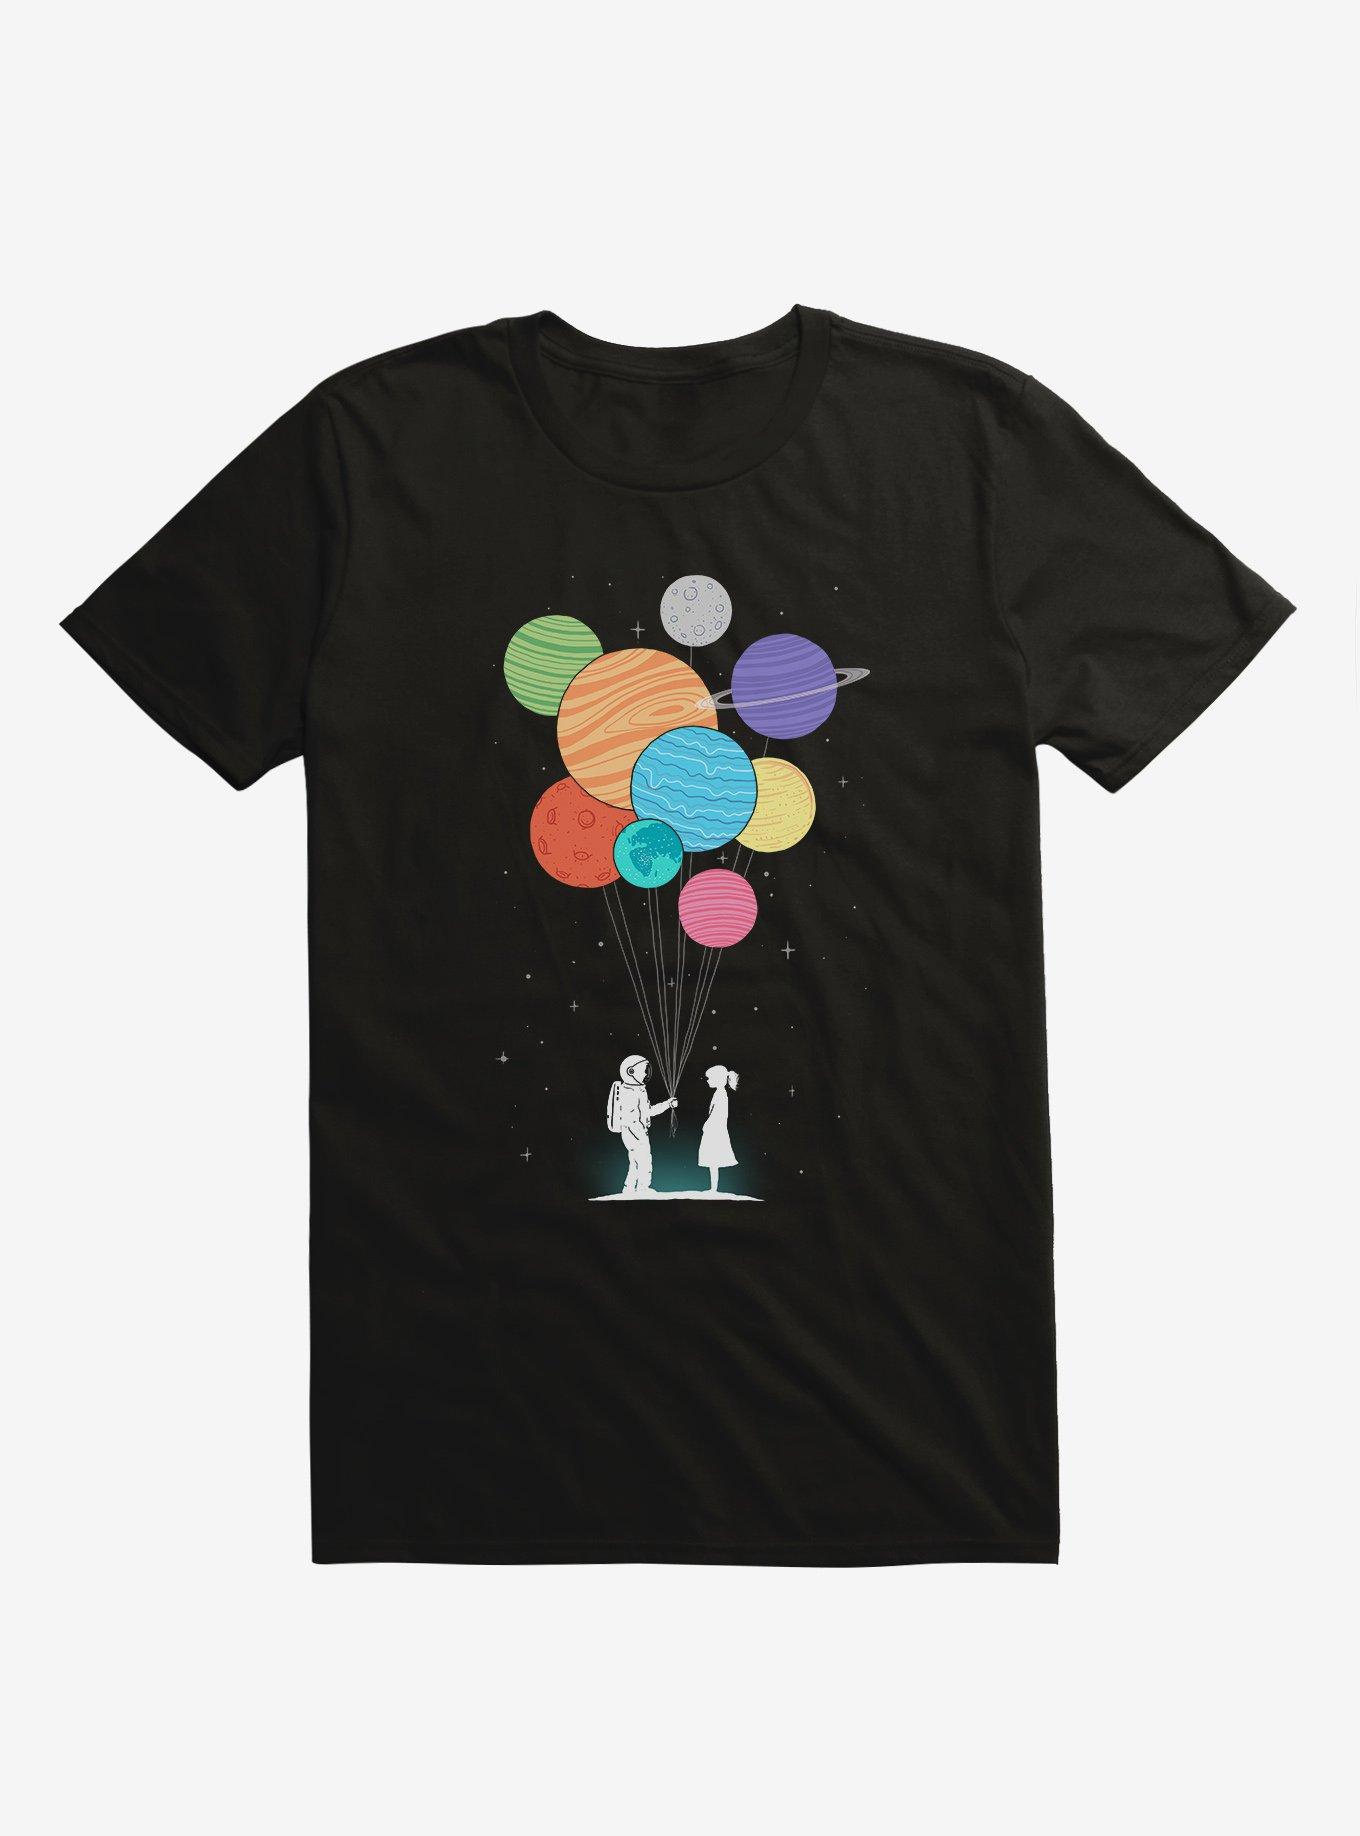 You Are My Universe Astronaut & Planets Black T-Shirt